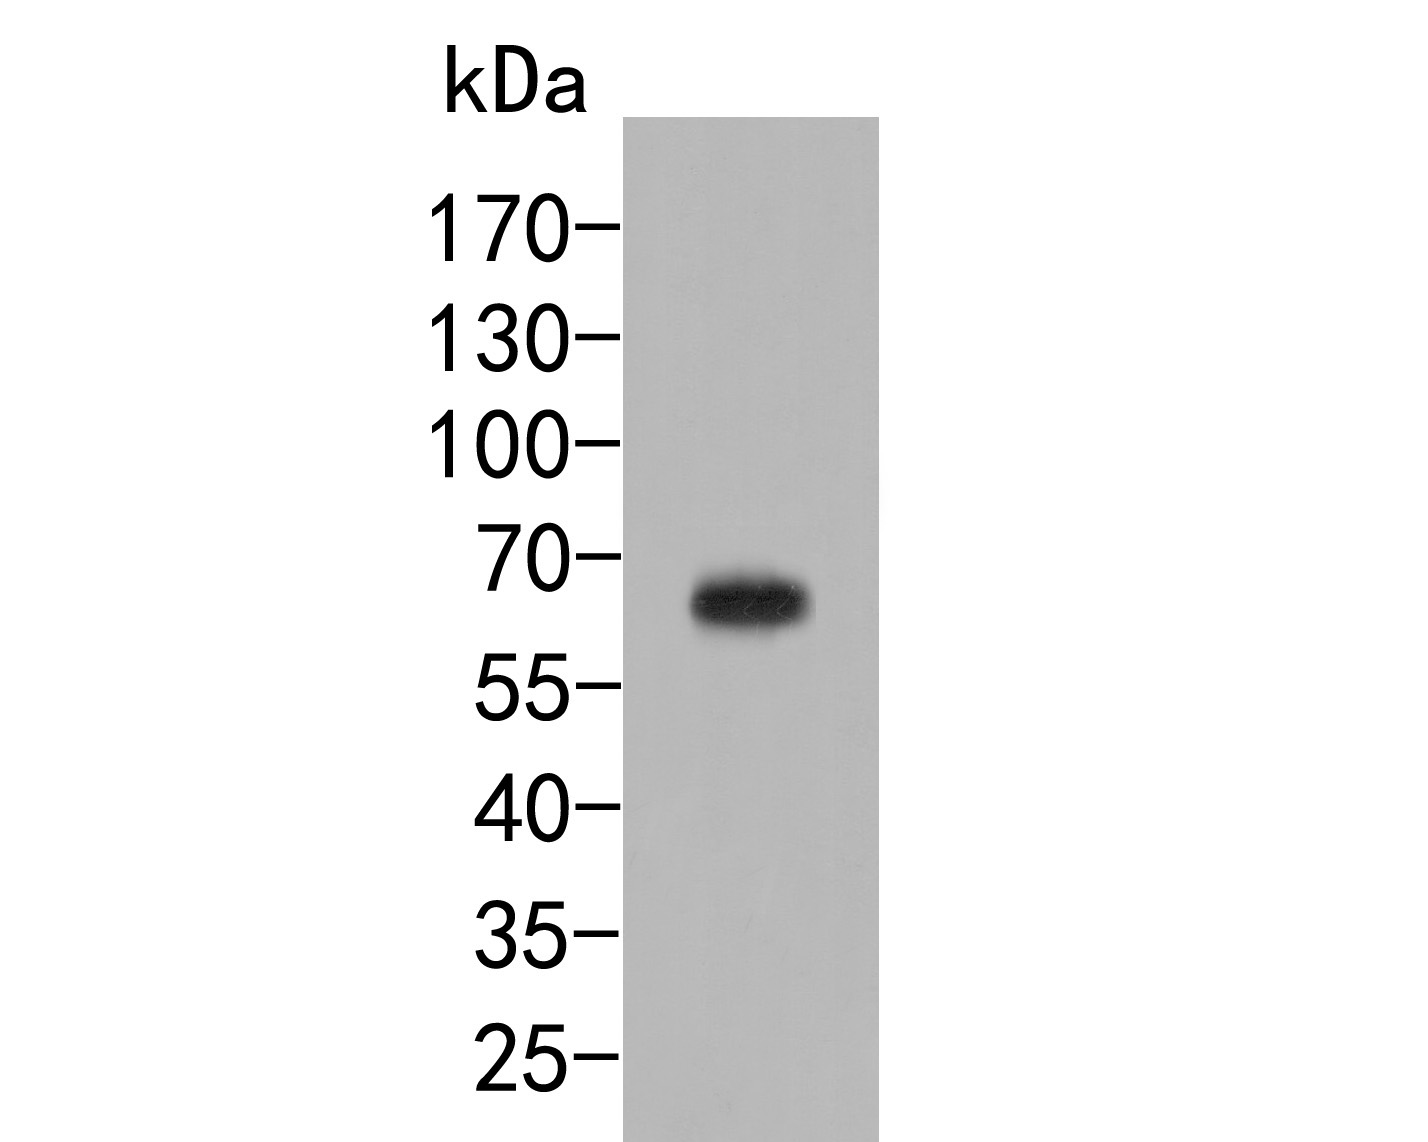 Western blot analysis of Dopamine Transporter on mouse brian tissue lysates. Proteins were transferred to a PVDF membrane and blocked with 5% BSA in PBS for 1 hour at room temperature. The primary antibody (HA500007, 1/500) was used in 5% BSA at room temperature for 2 hours. Goat Anti-Rabbit IgG - HRP Secondary Antibody (HA1001) at 1:5,000 dilution was used for 1 hour at room temperature.